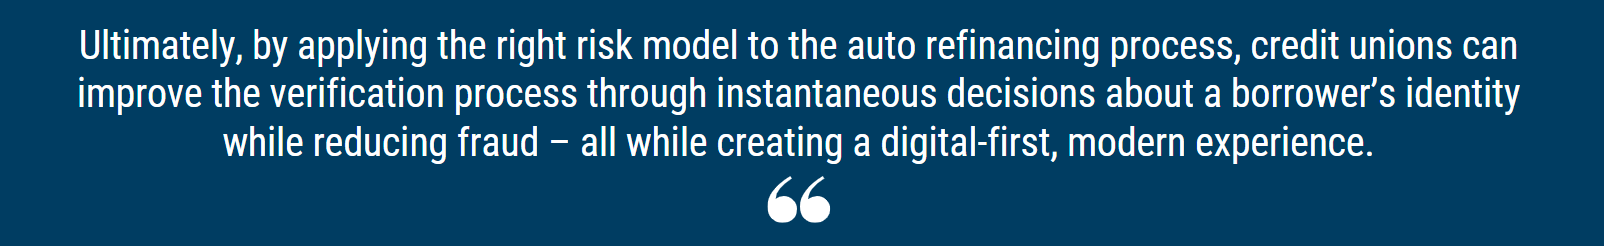 Ultimately, by applying the right risk model to the auto refinancing process, credit unions can improve the verification process through instantaneous decisions about a borrower’s identity while reducing fraud – all while creating a digital-first, modern experience.